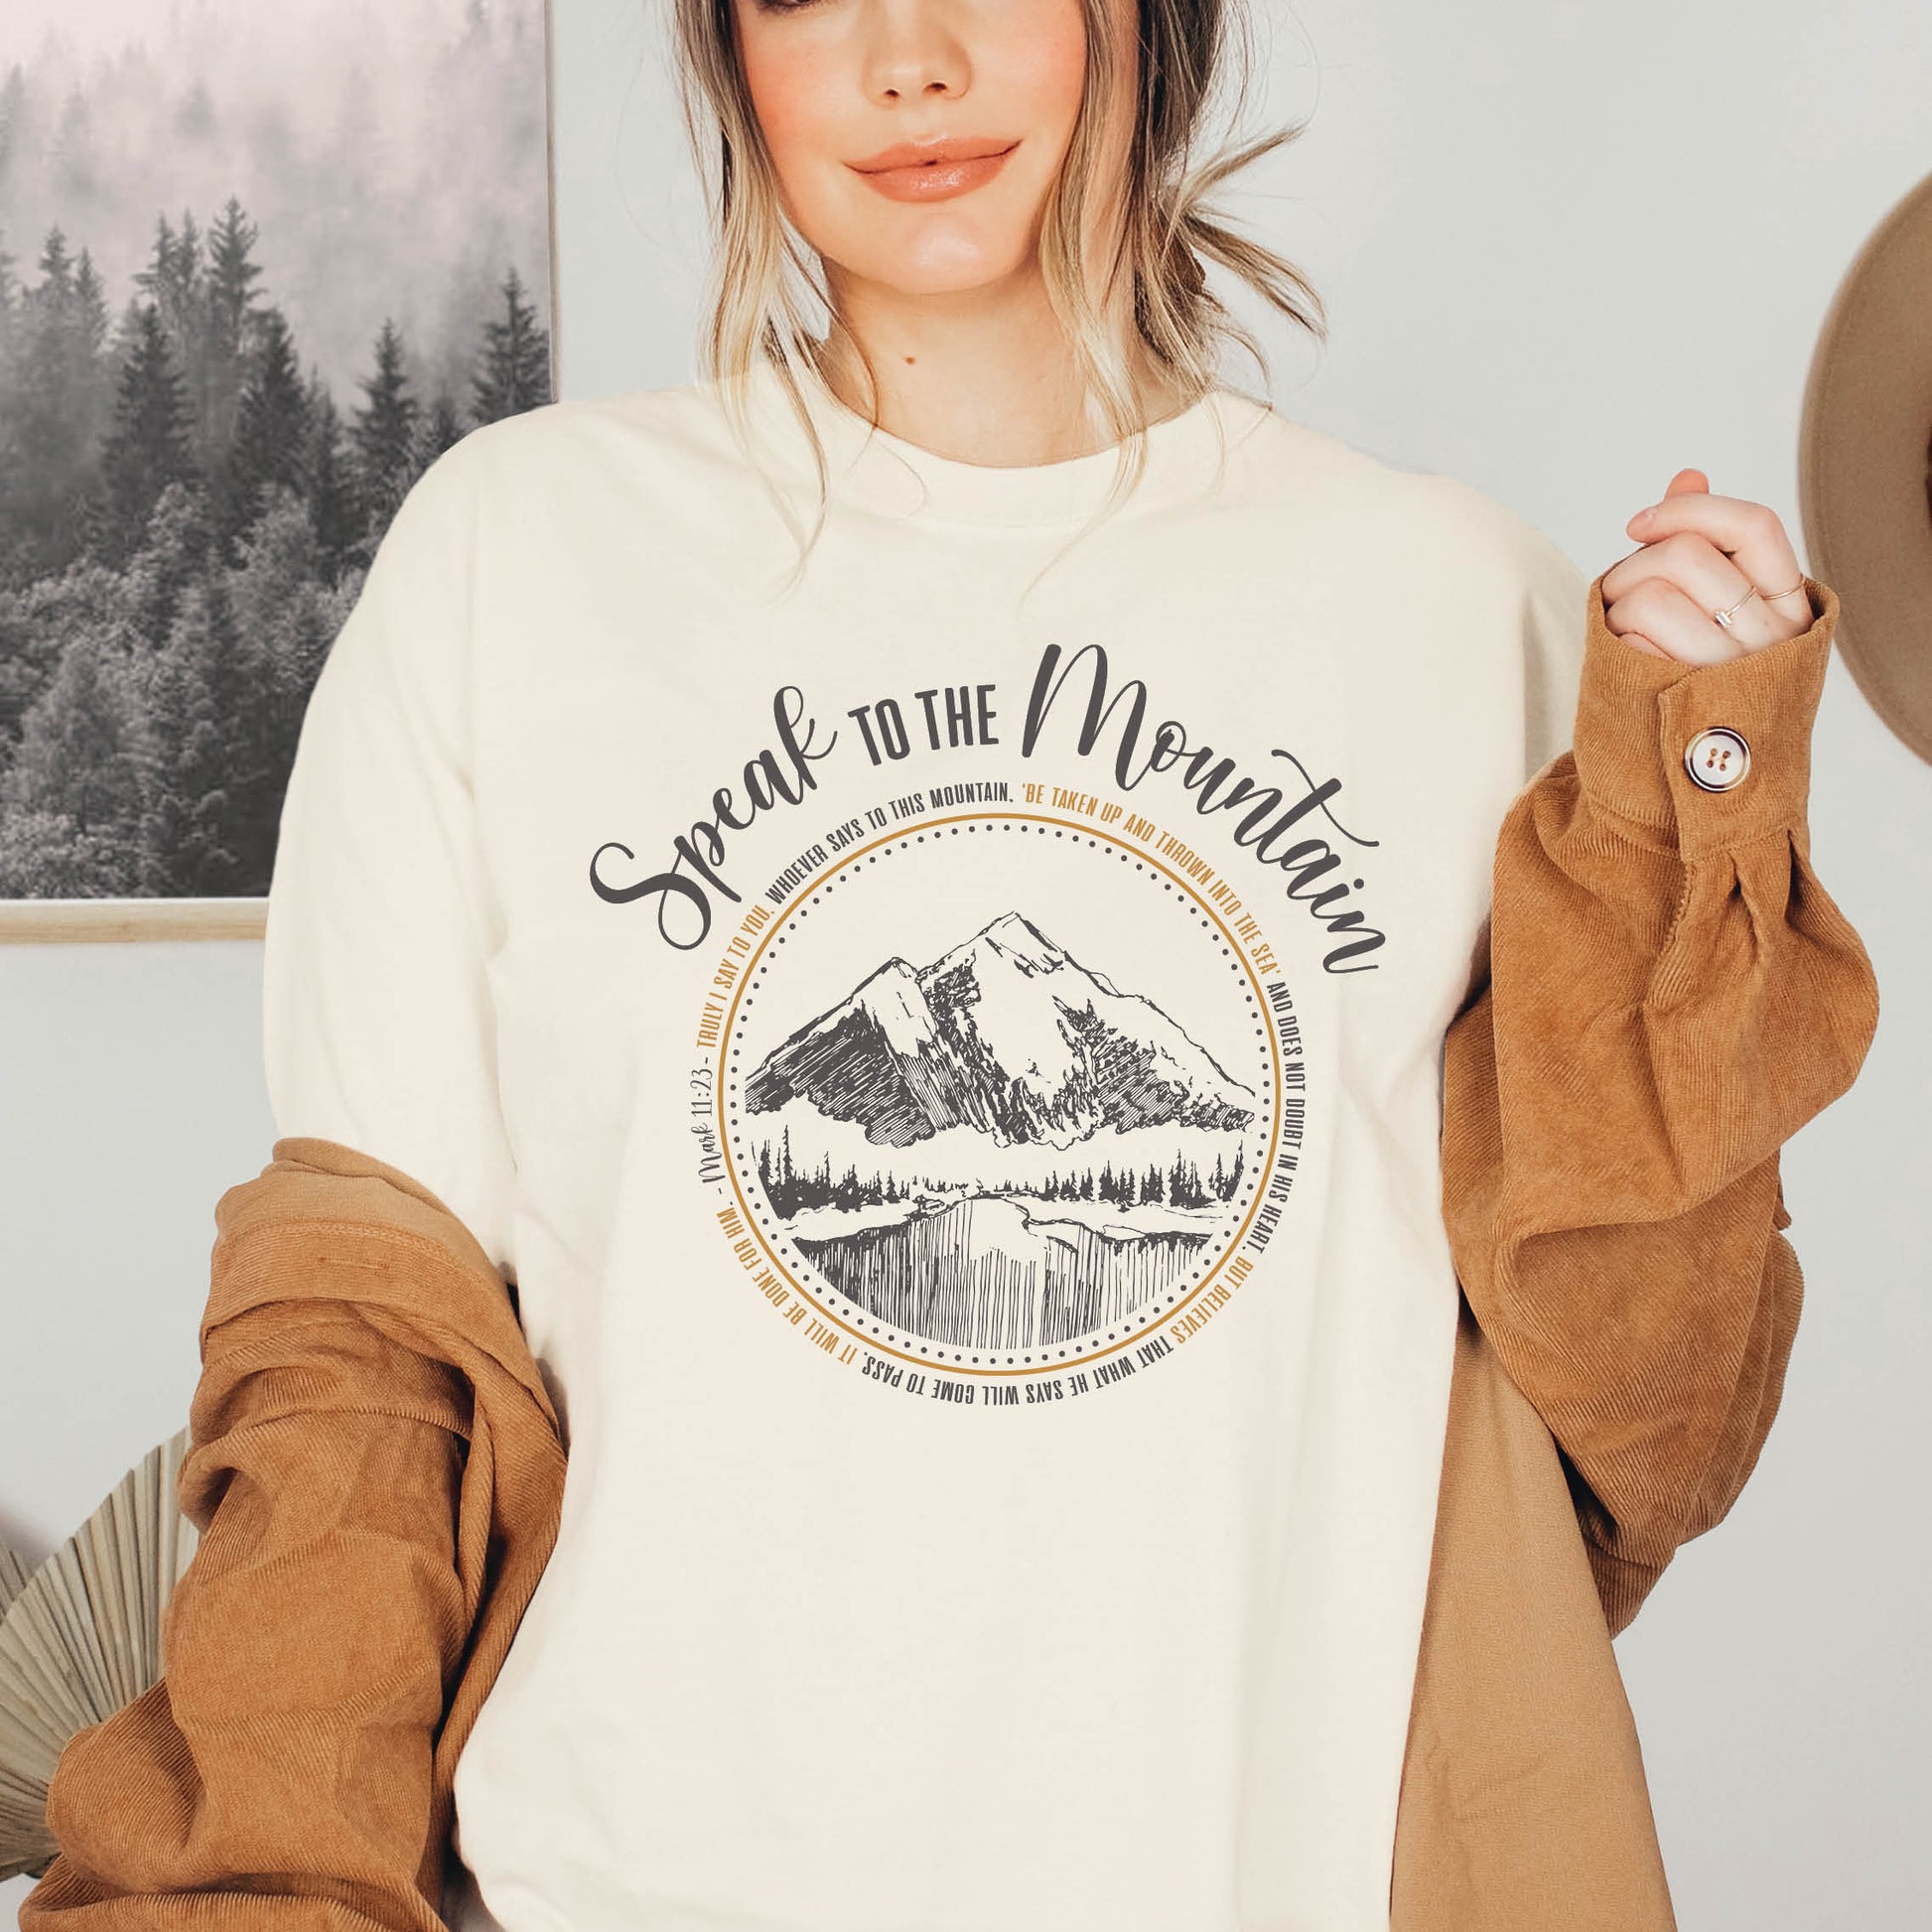 Speak to the Mountain Christian soft cream unisex graphic t-shirt with Mark 11:23 Whosoever Believes scripture faith-based tee, designed for women